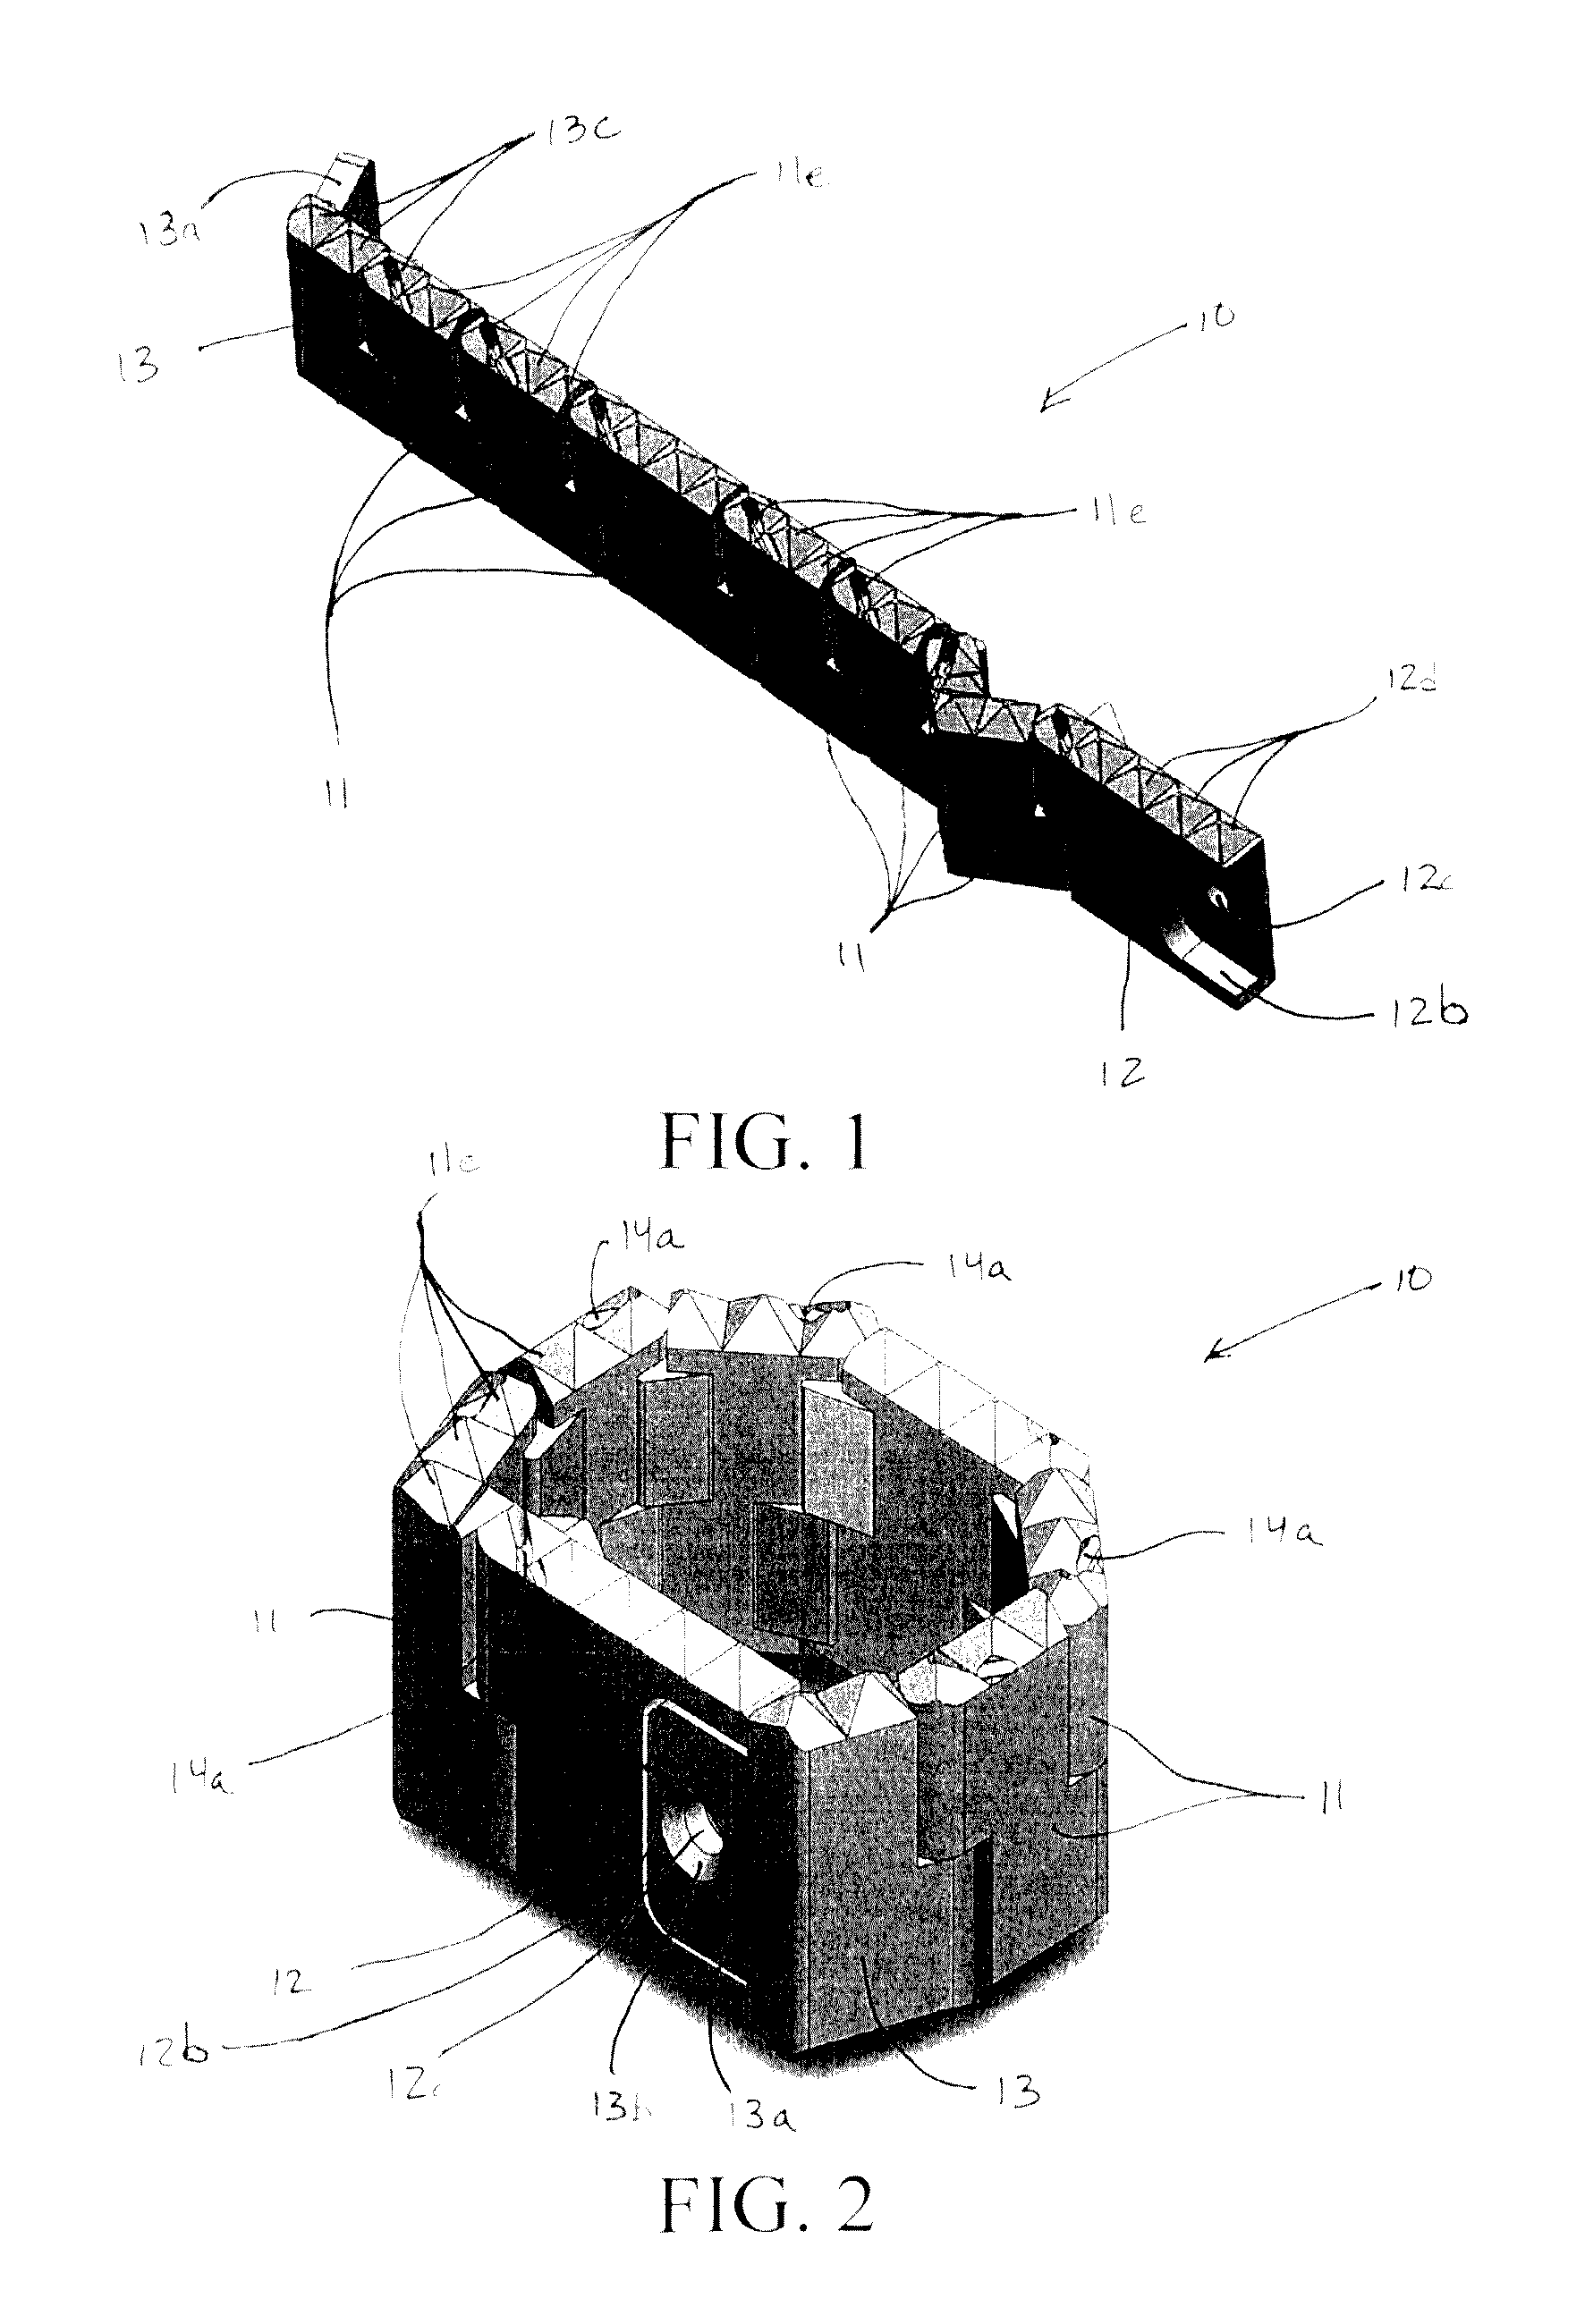 Expandable inter-vertebral cage and method of installing same